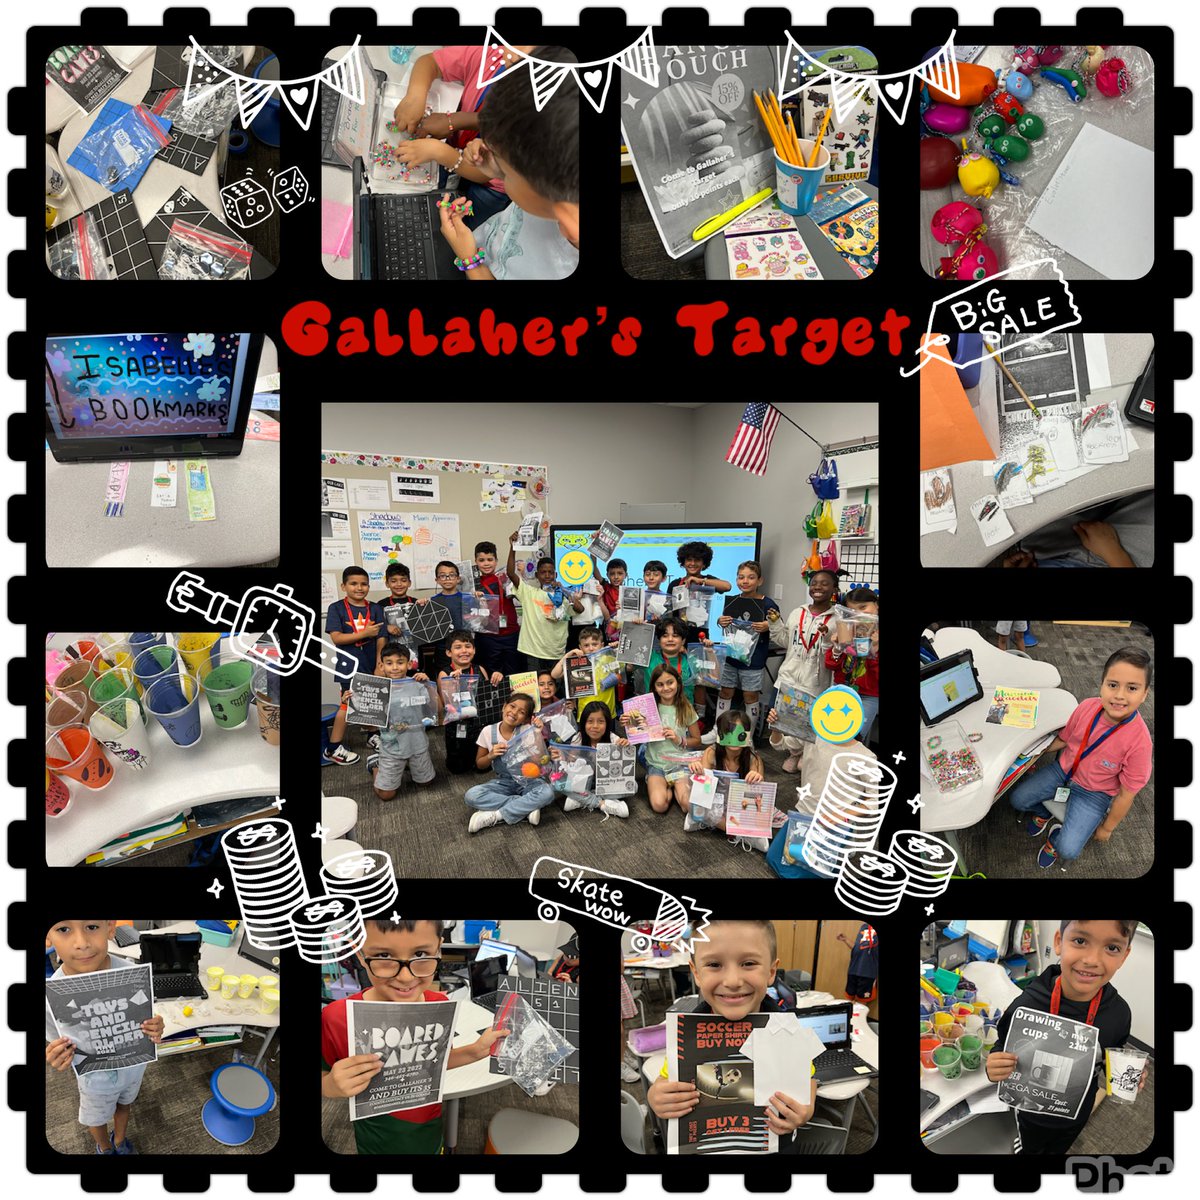 Board games, squishies, and bracelets Oh My! Gallahers’ Target was a success! Students created infomercials on @MicrosoftFlip and flyers on Adobe Express to persuade others to buy their product. @CFISDAndre @CFISD_ELAR2_5 @CFISDELs #LeopardsLEAD #Bringingoutthebest